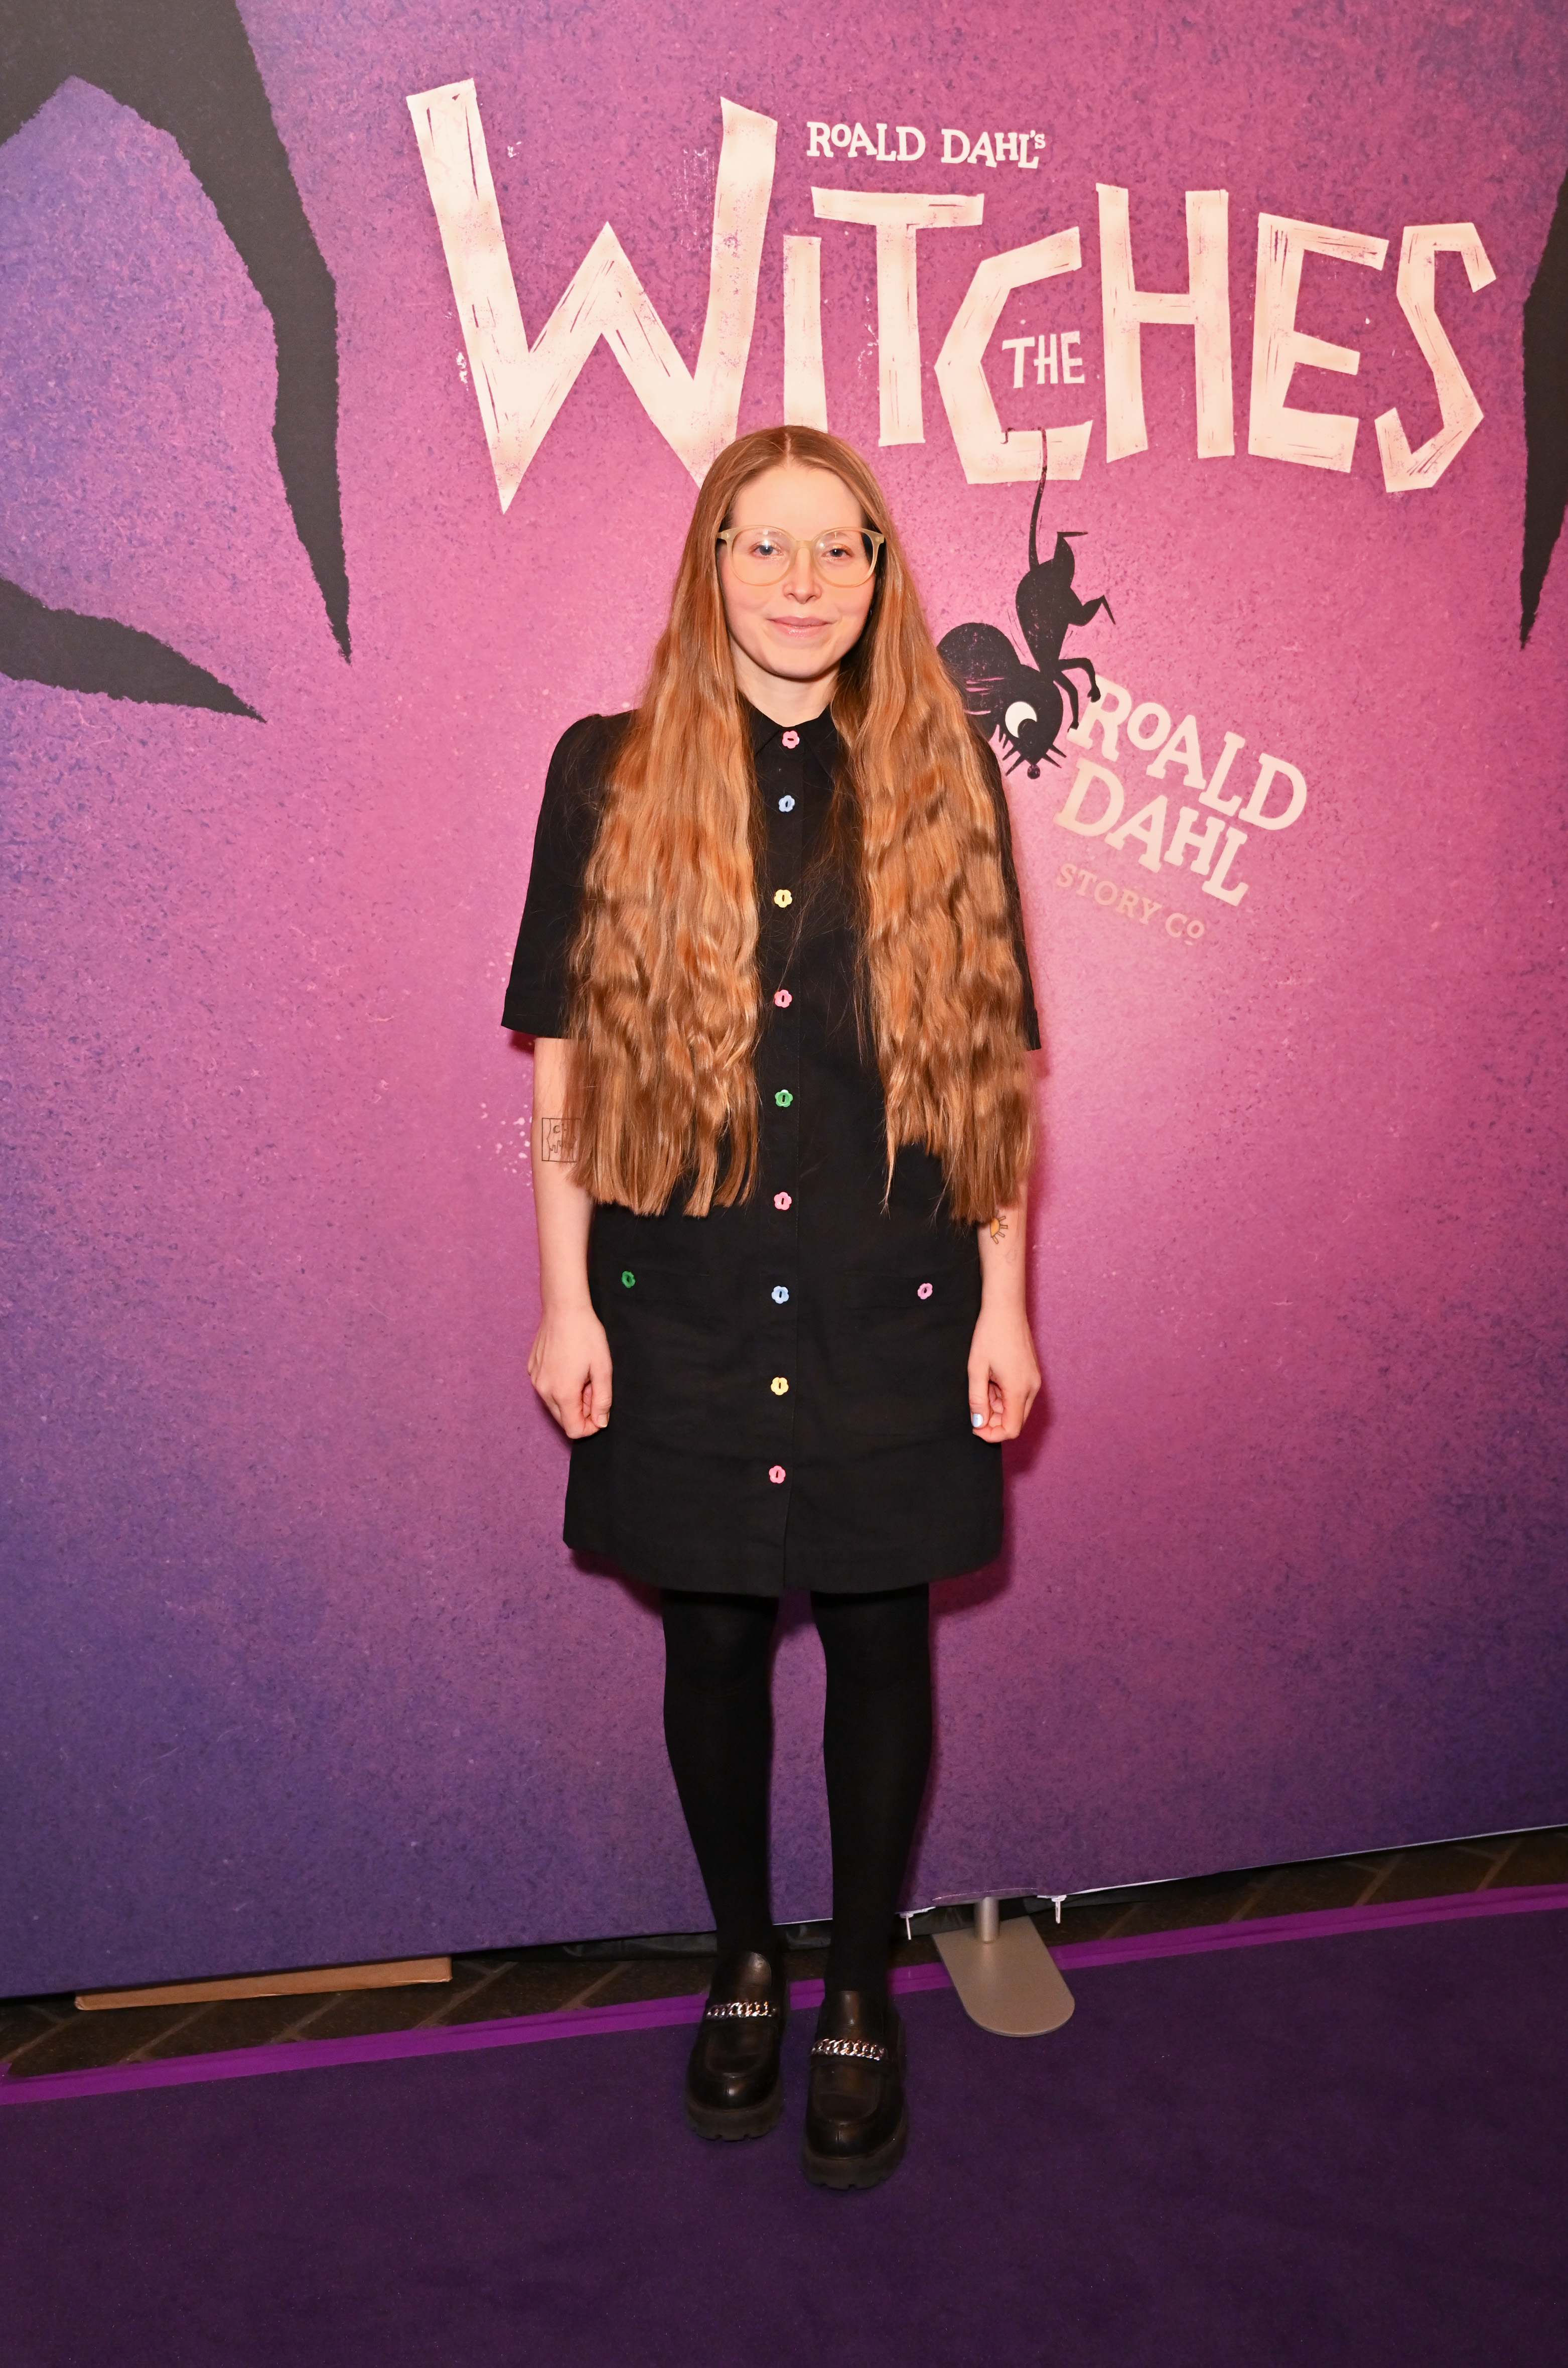 Jessie stands before &#x27;The Witches&#x27; backdrop wearing a dress and platform shoes at a premiere